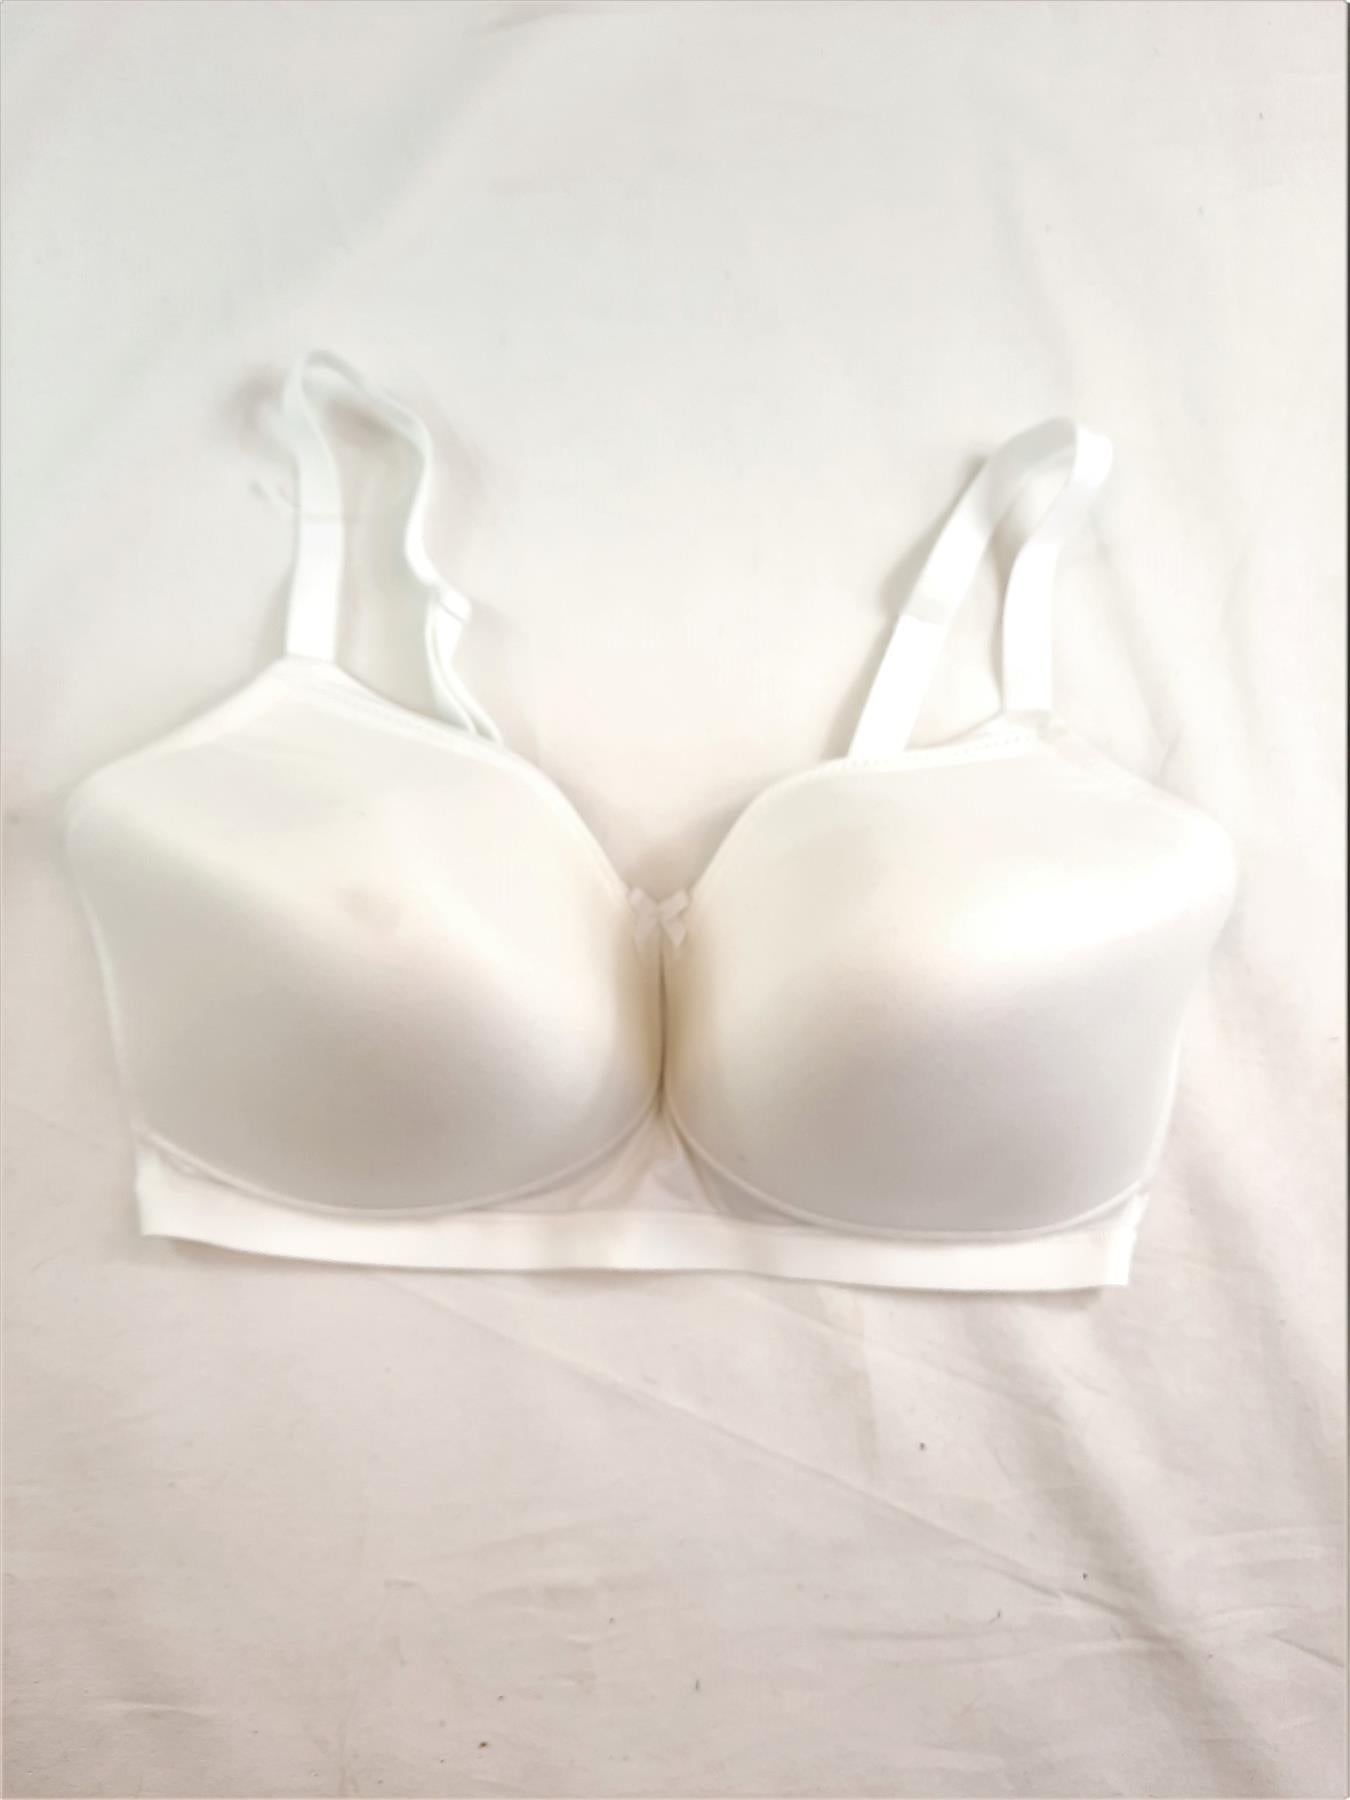 M S Soft Comfort Bra Non-Wired Lightly-Padded White Shop Soiled Brand New